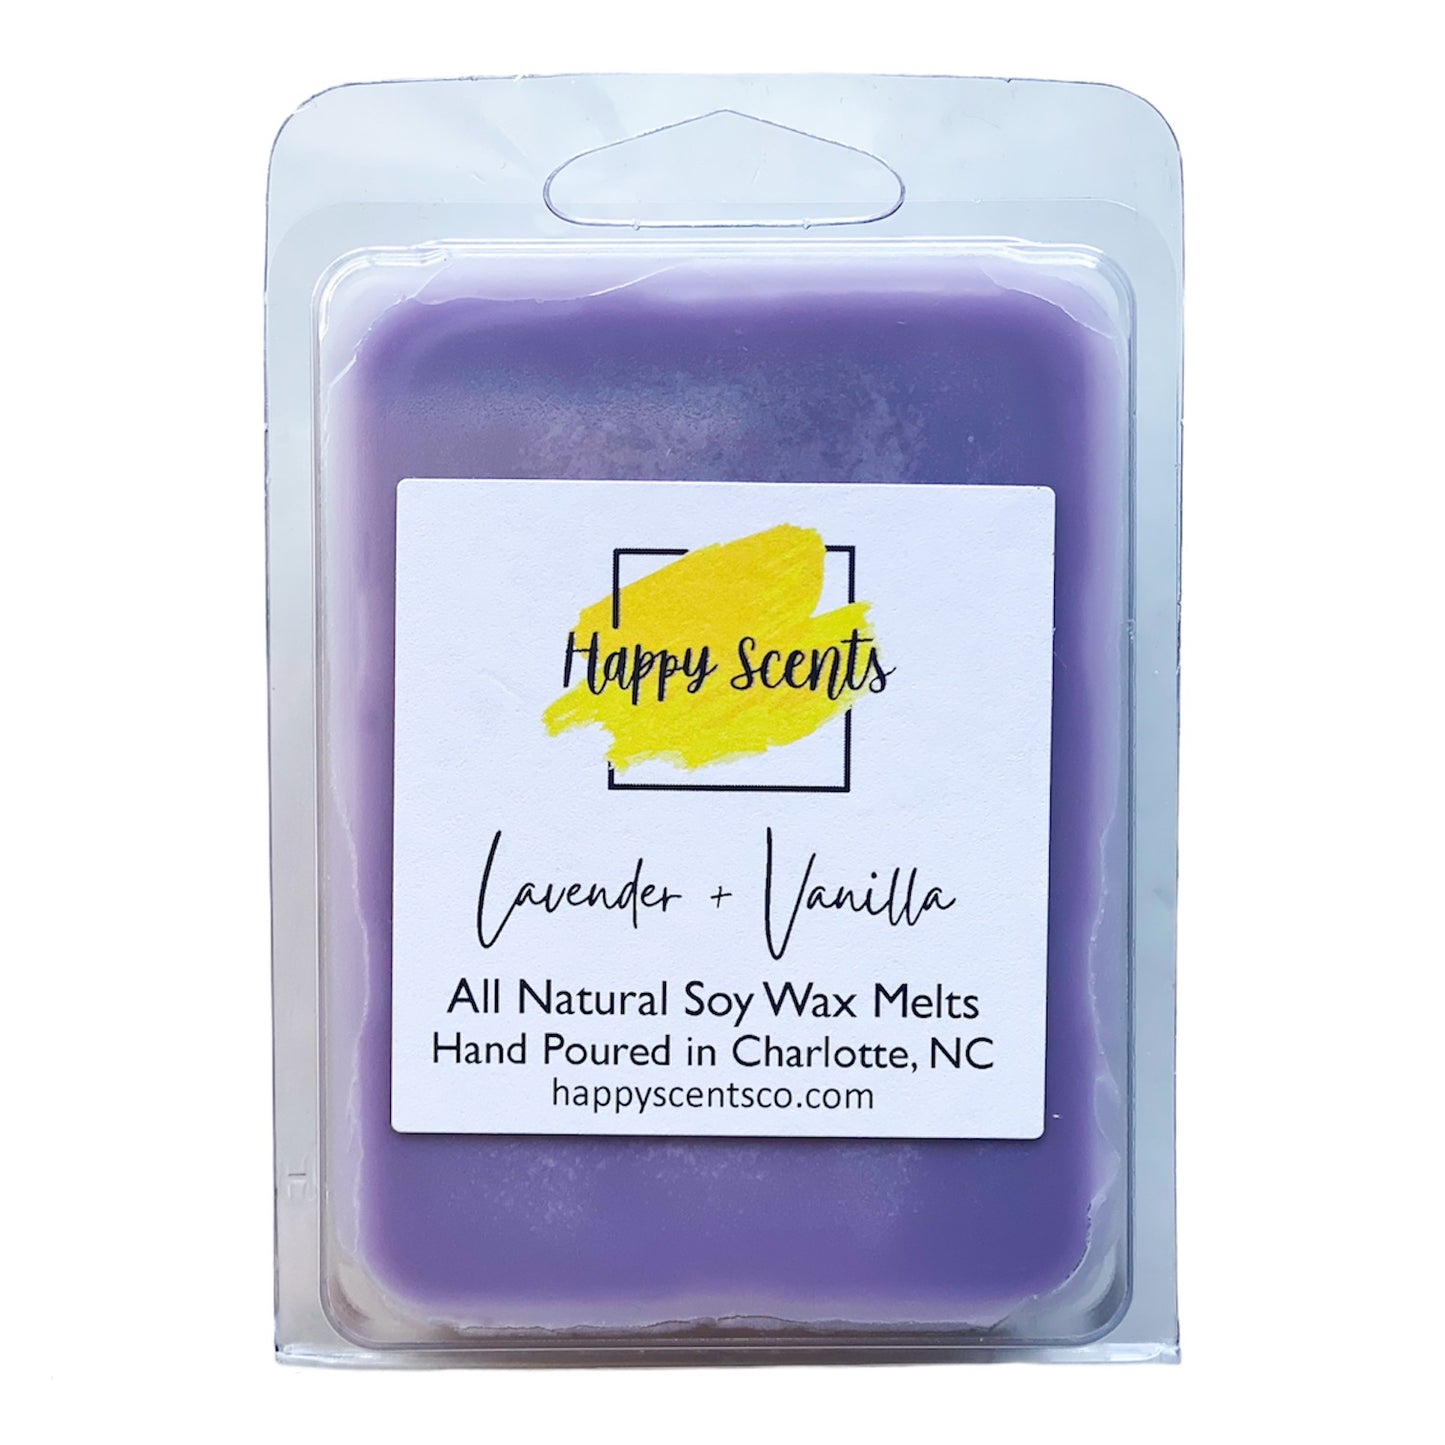 Lavender and Vanilla scented wax melts in clamshell container.